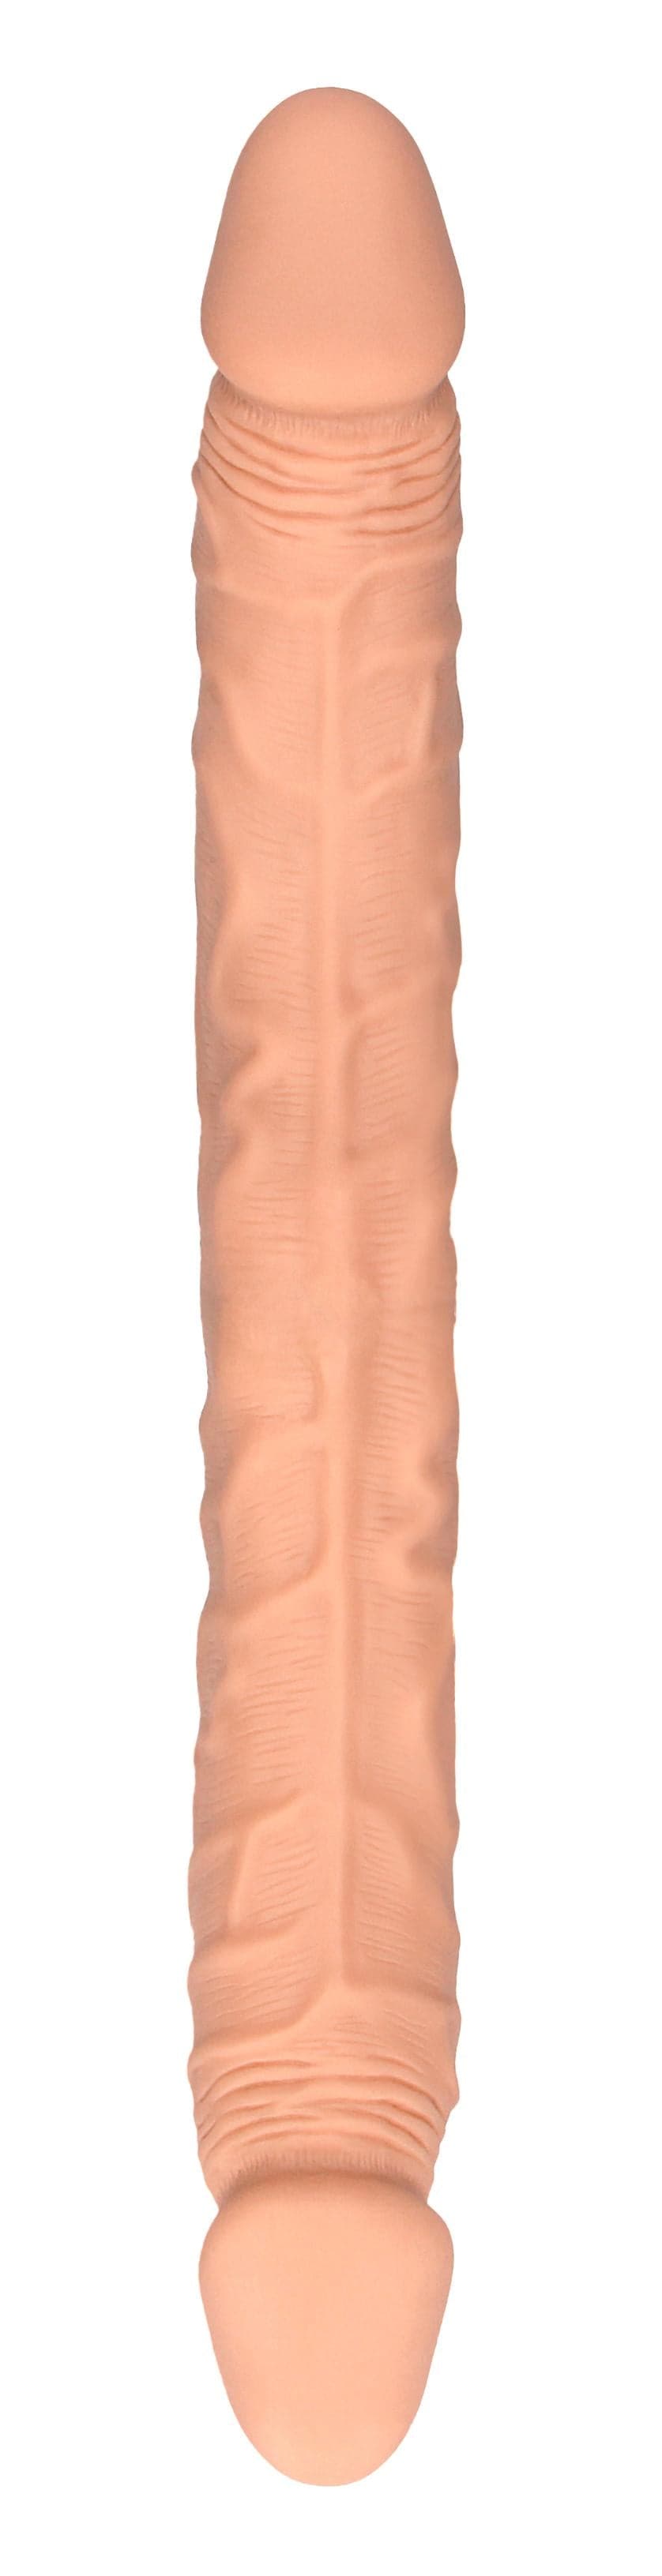 18 inch double dong flesh